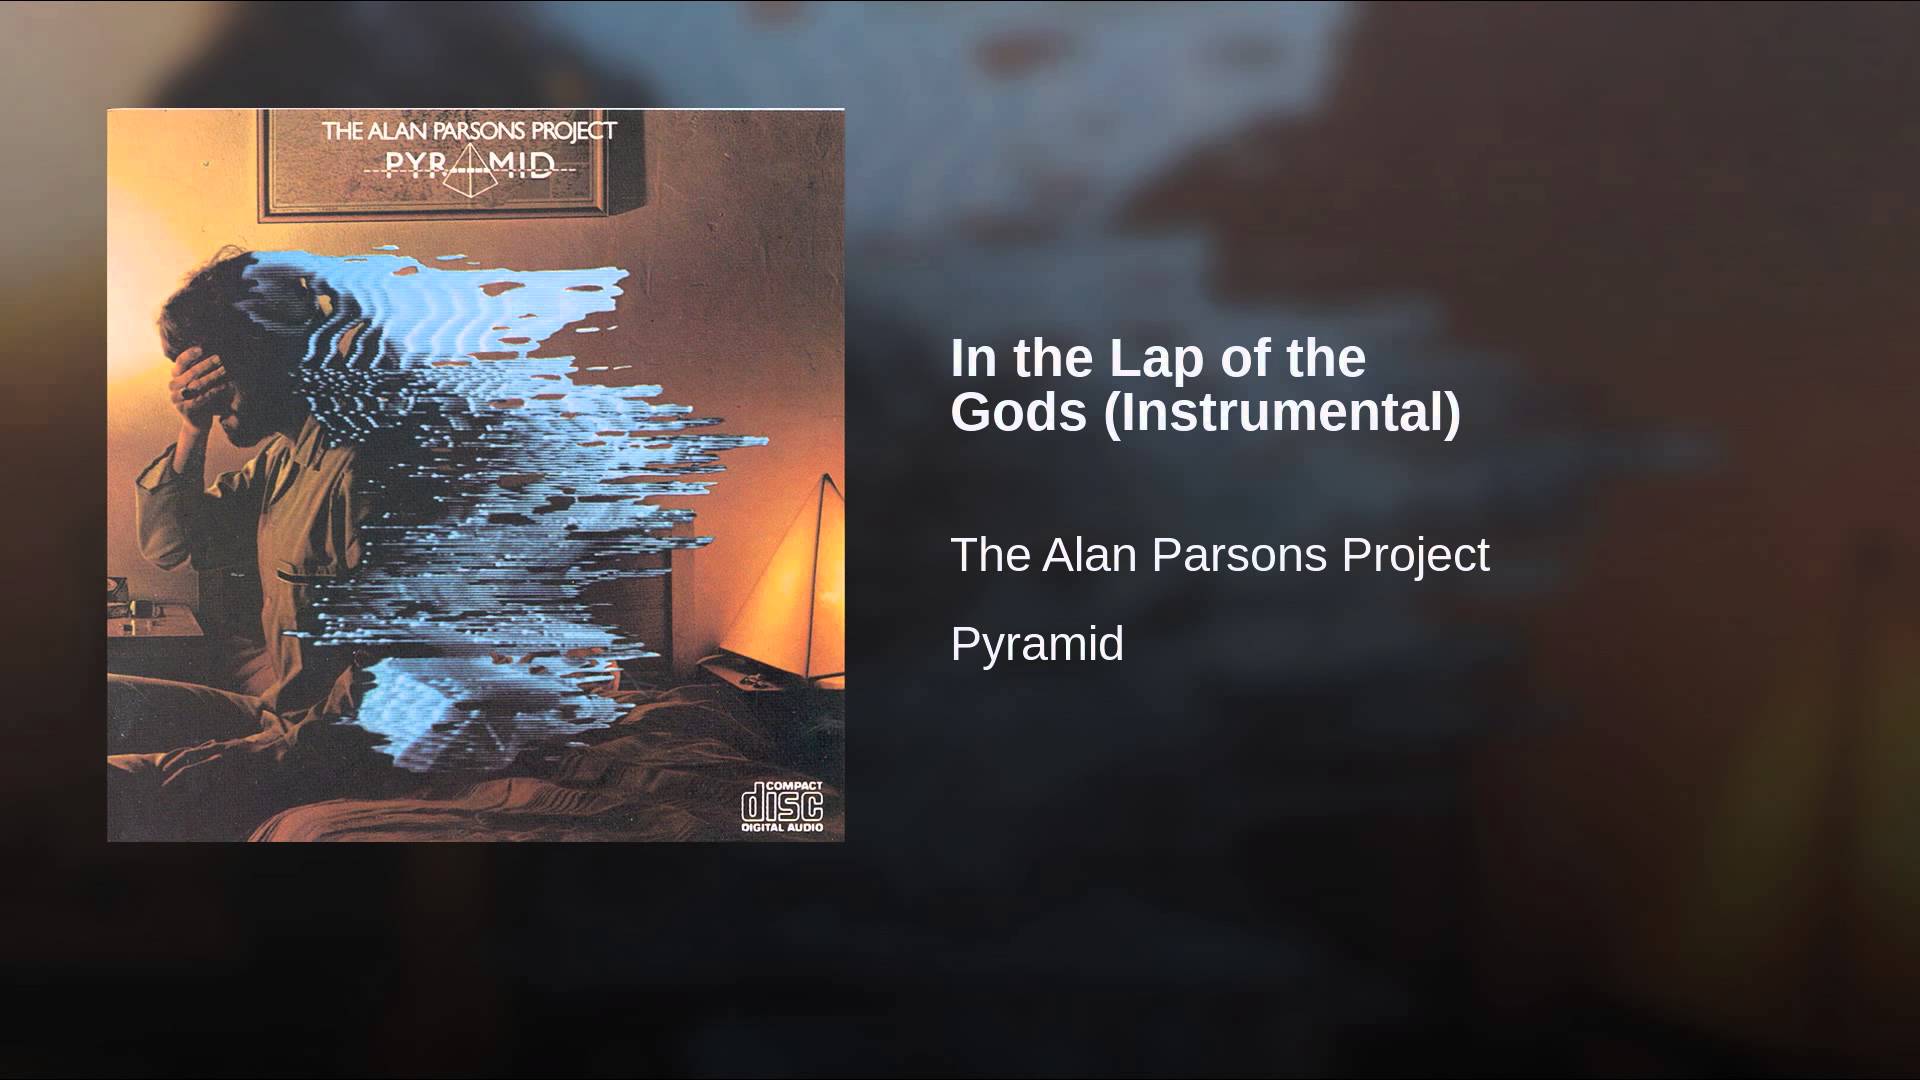 In the Lap of the Gods (Instrumental) - YouTube